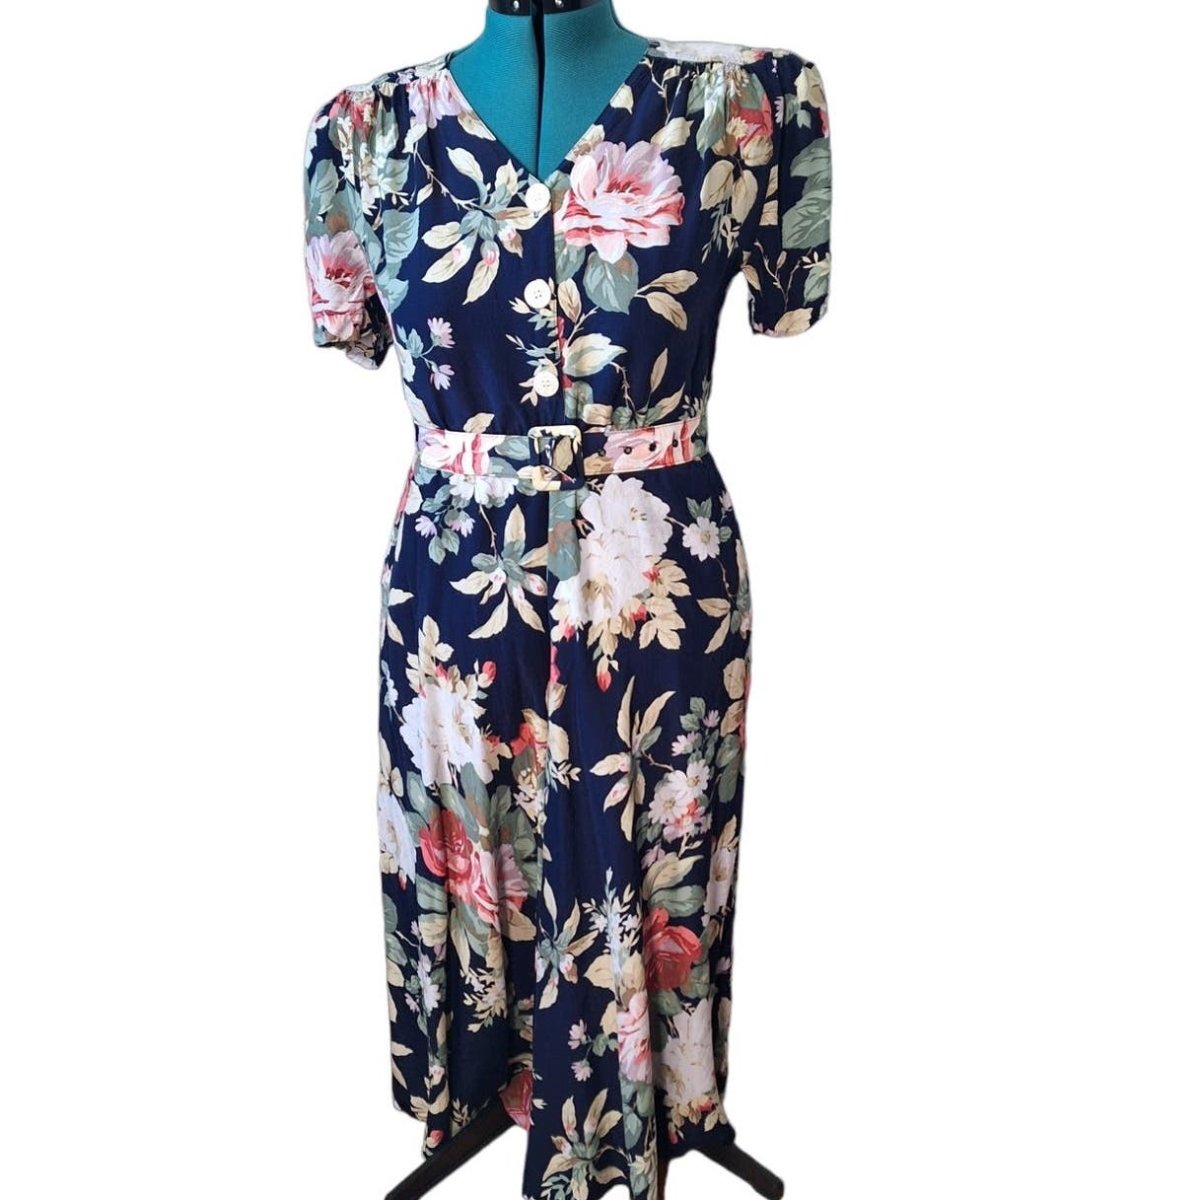 Vintage 80s does 40s Navy Floral Rayon Dress Women Size Medium - themallvintage The Mall Vintage